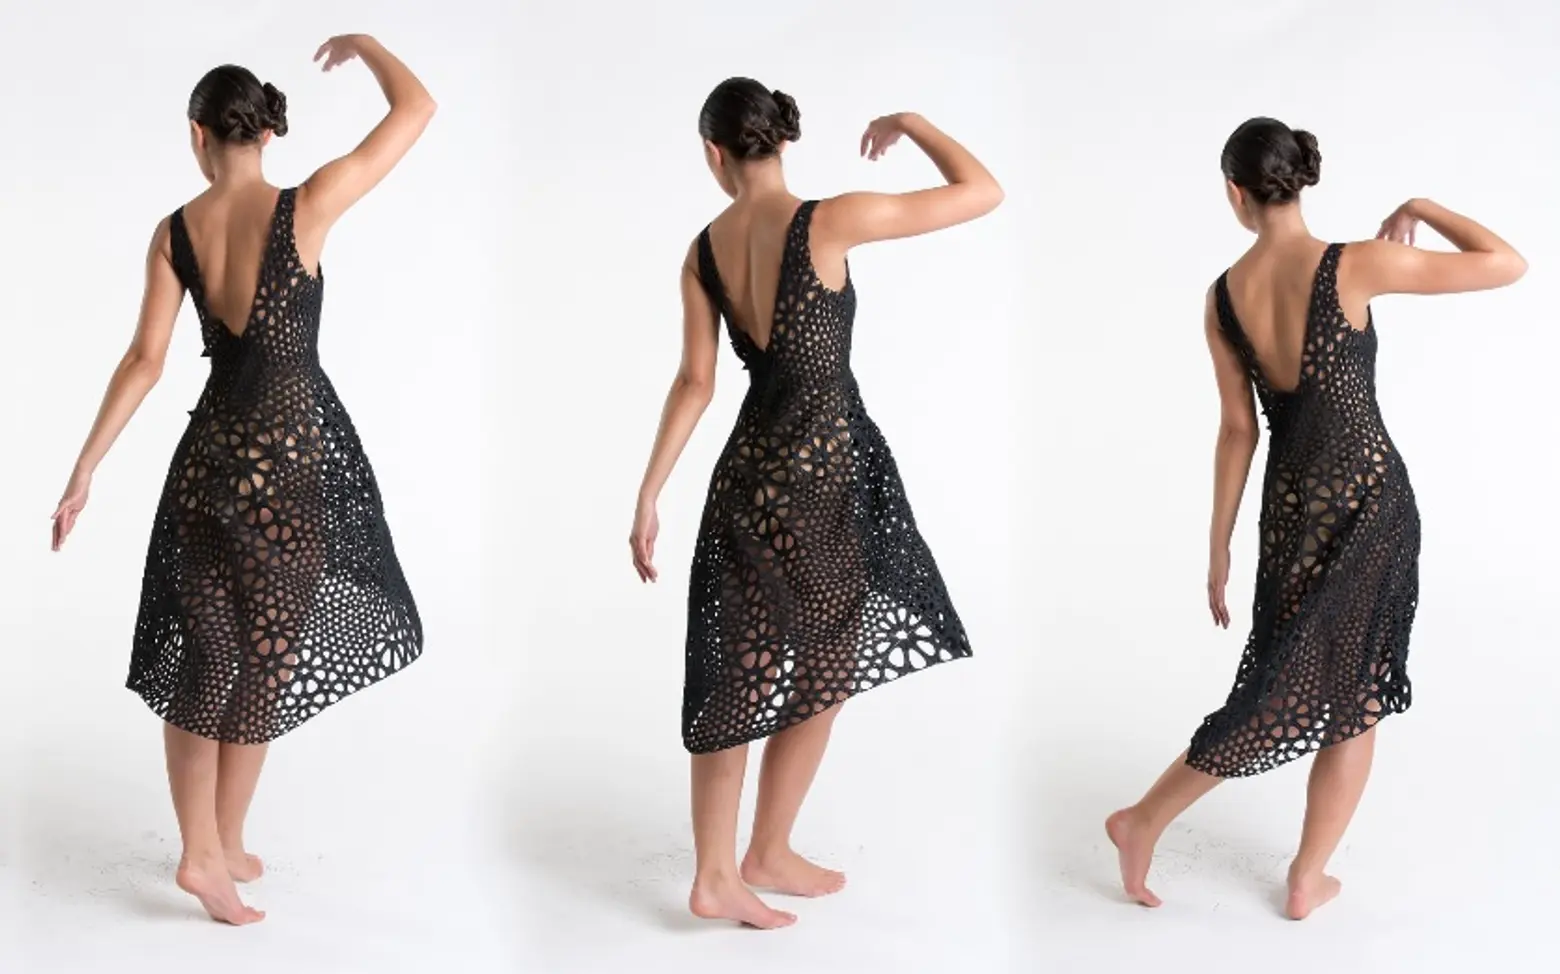 Daily Link Fix: MoMA Acquires the First 4D-Printed Dress; 16 Secrets of the NYC Subway